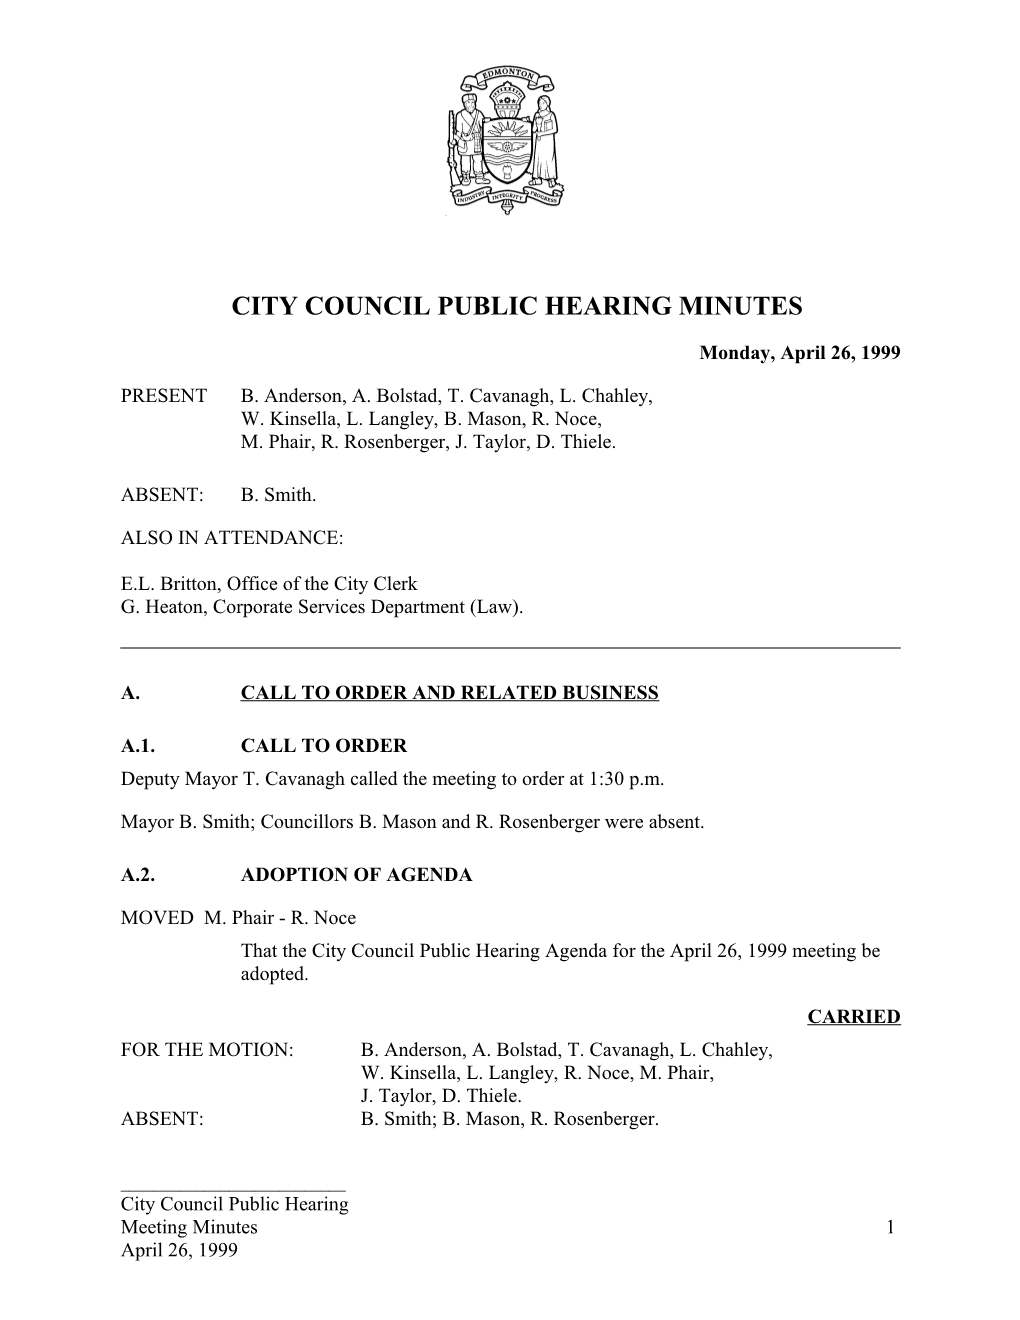 Minutes for City Council April 26, 1999 Meeting